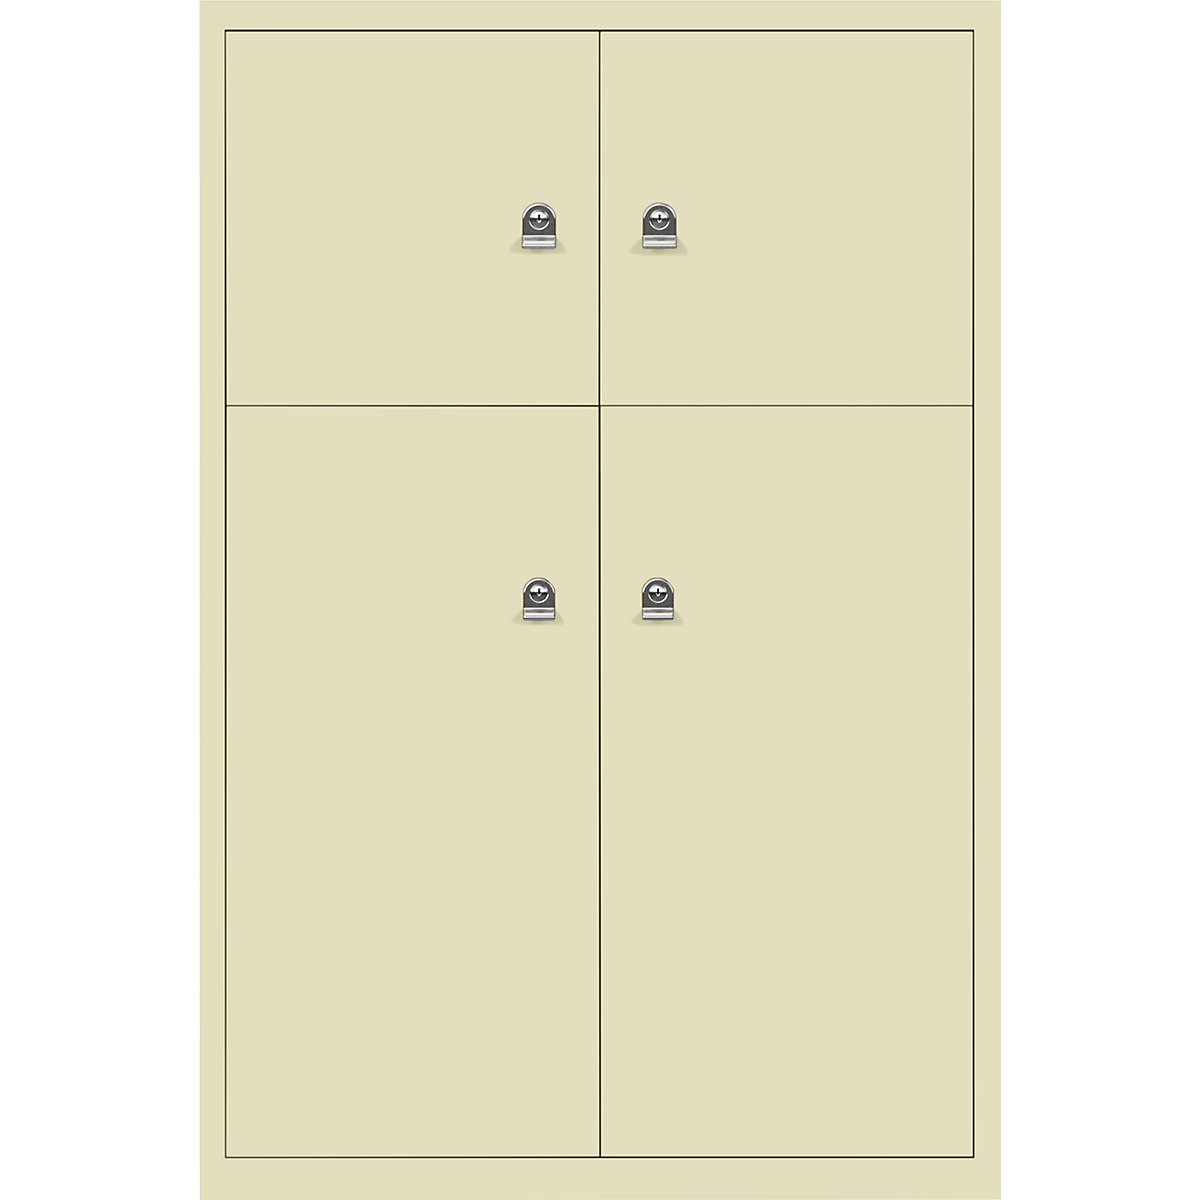 BISLEY – LateralFile™ lodge, with 4 lockable compartments, height 2 x 375 mm, 2 x 755 mm, cream